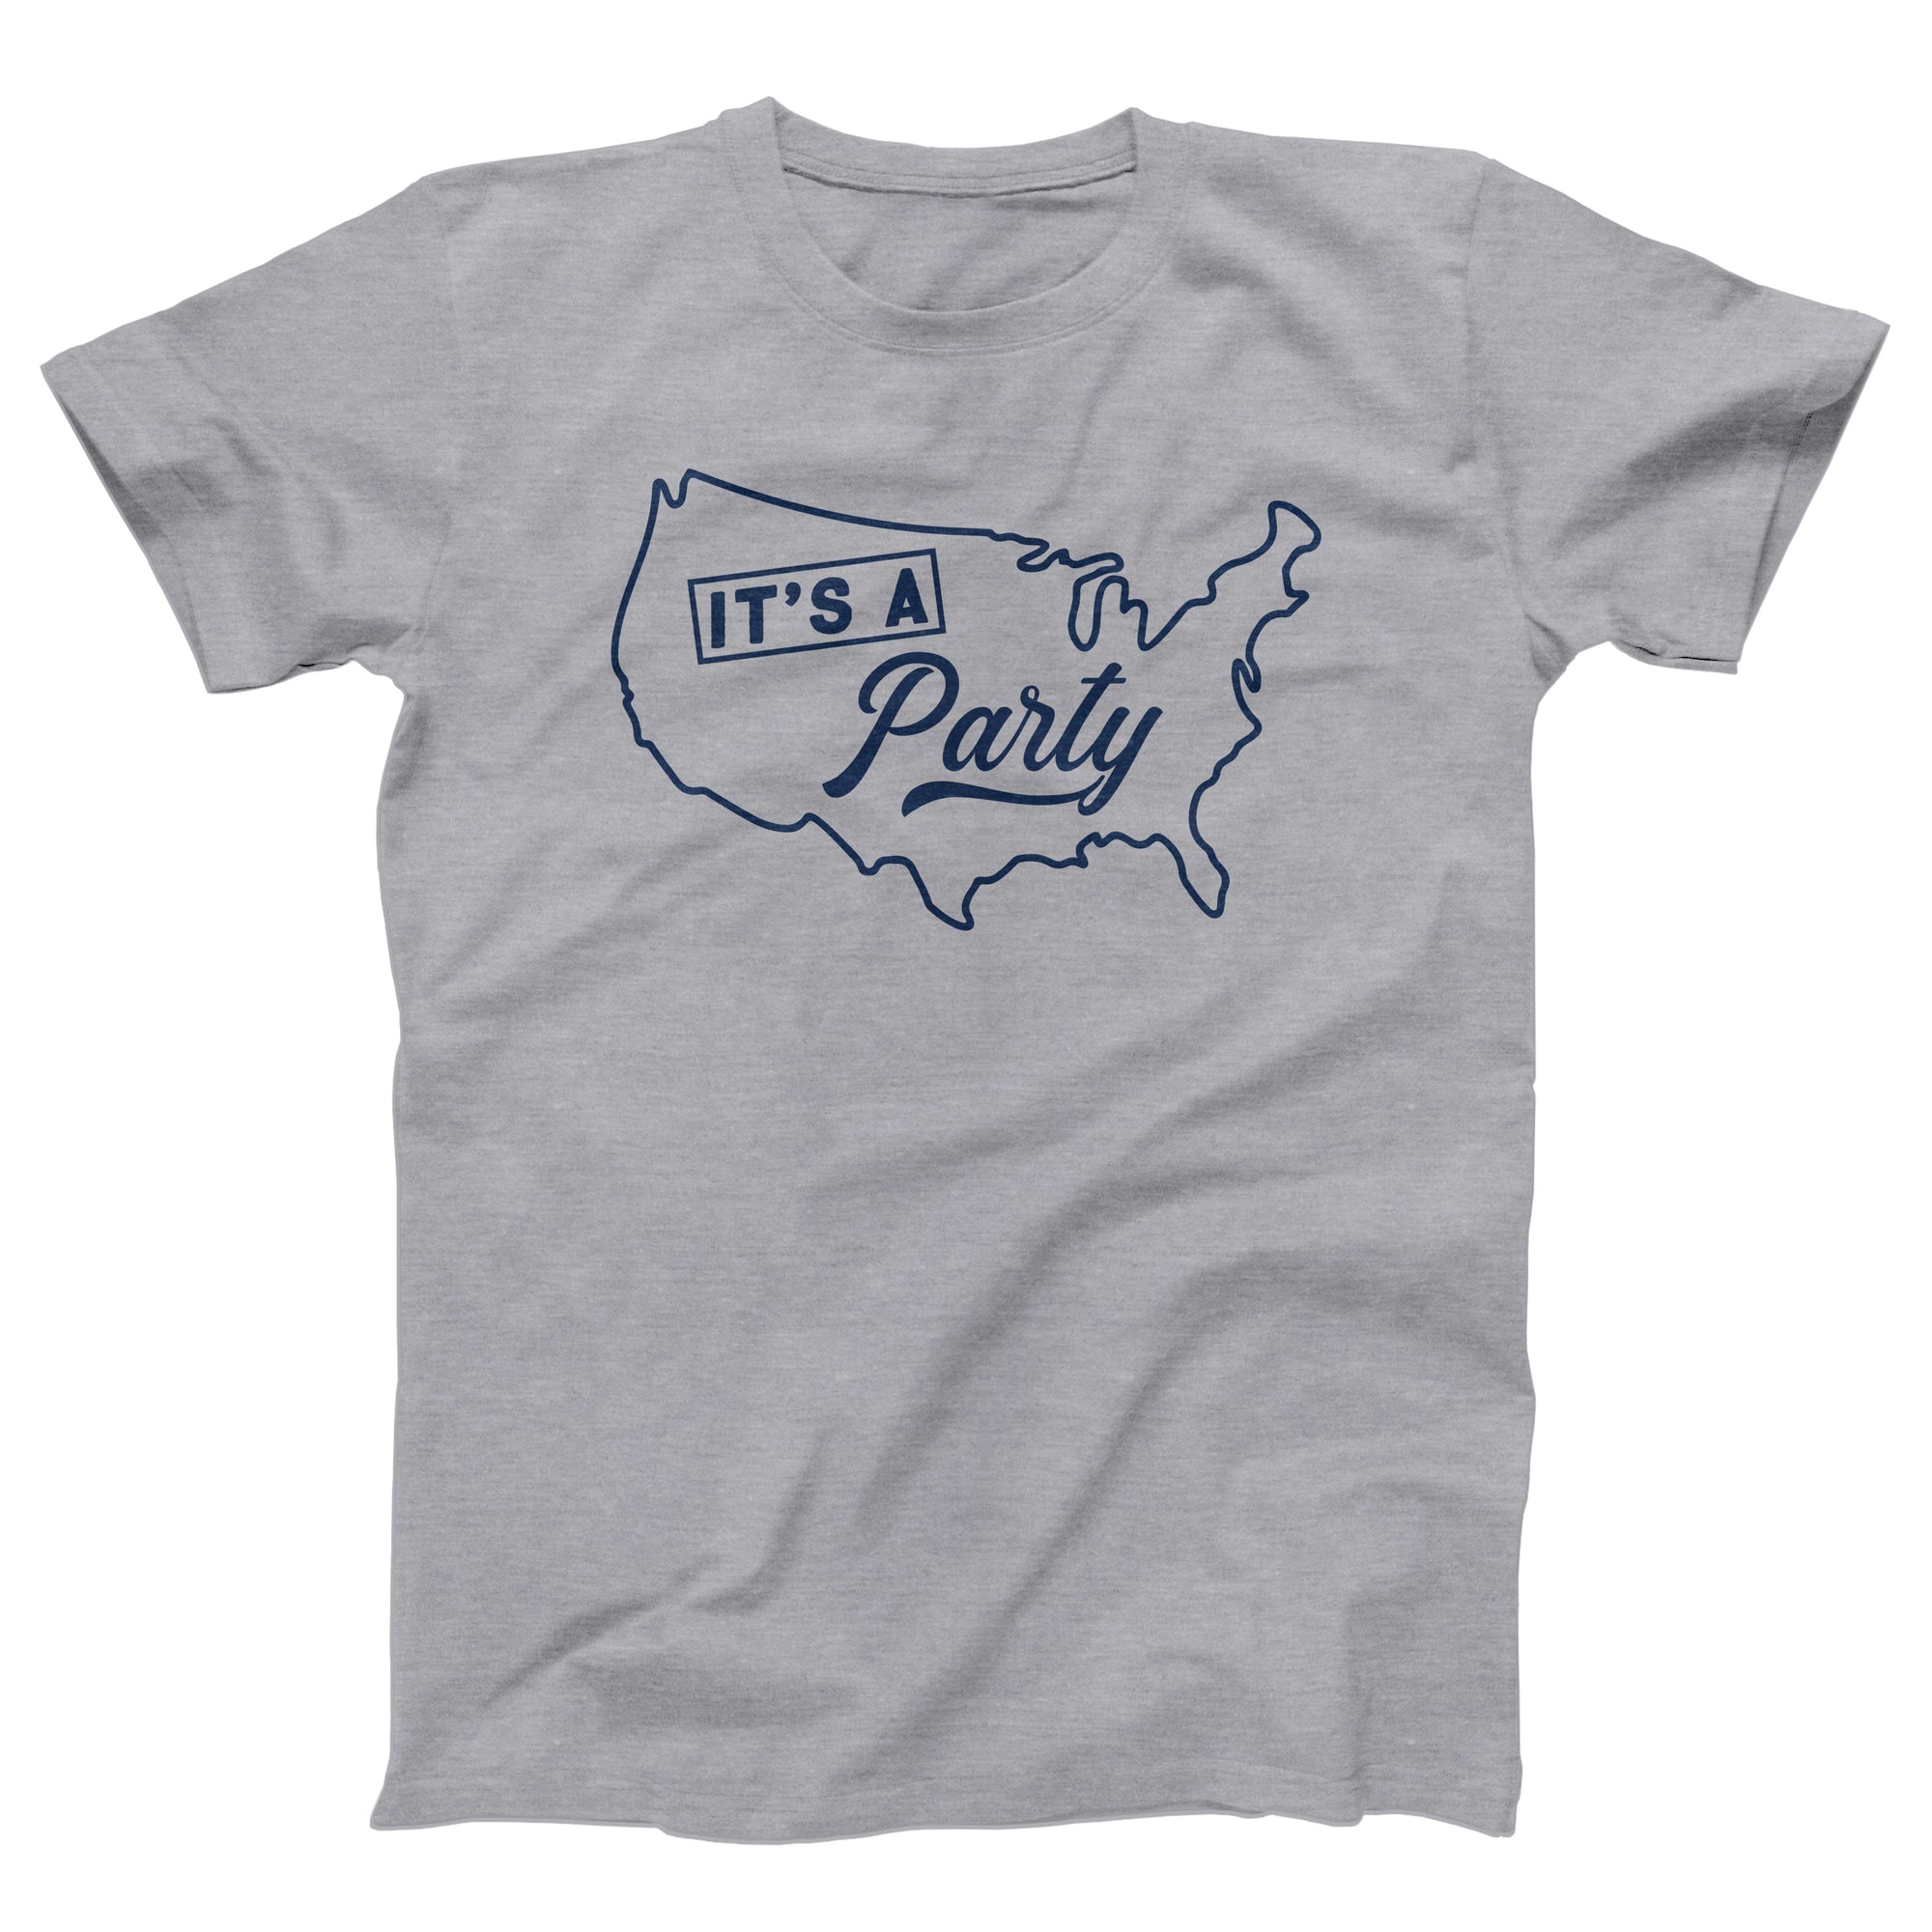 Party in the USA Adult Unisex T-Shirt